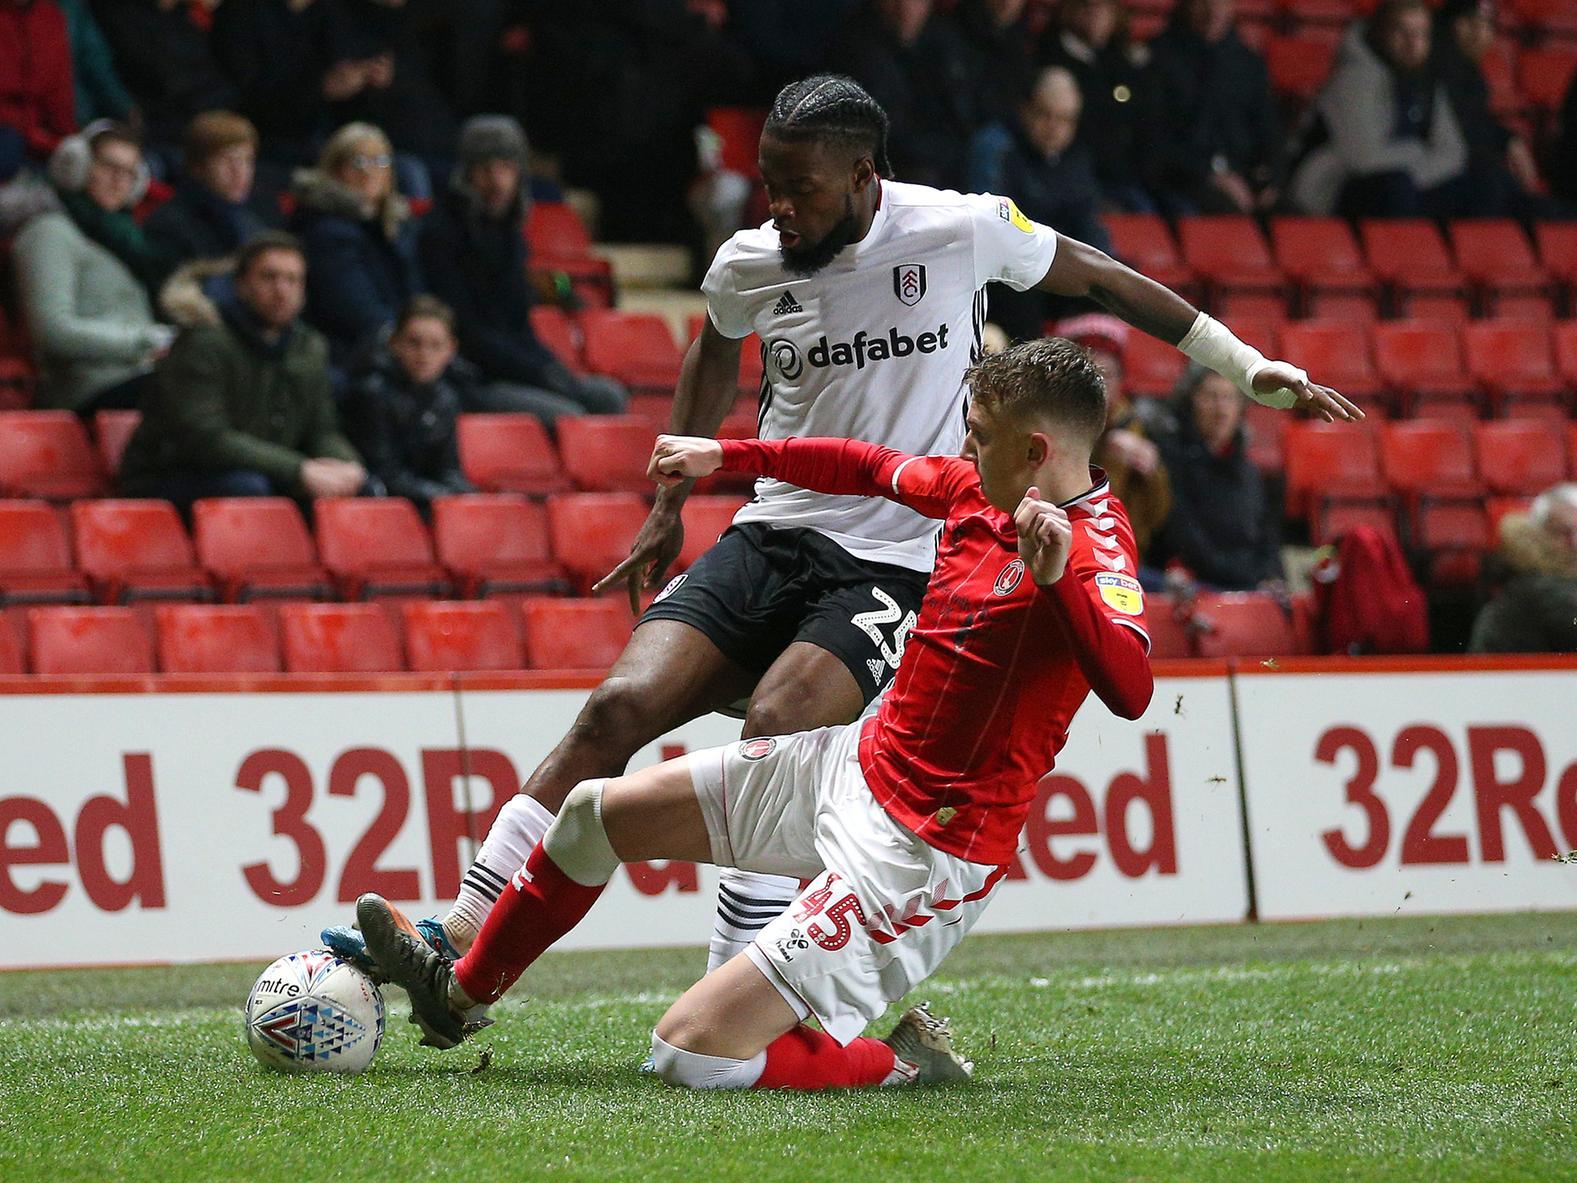 Charlton Athletic have given Fulham a hands-off warning over their starlet midfielder Alfie Doughty, who has 18 months left on his contract and is in high-demand at present. (Sky Sports)